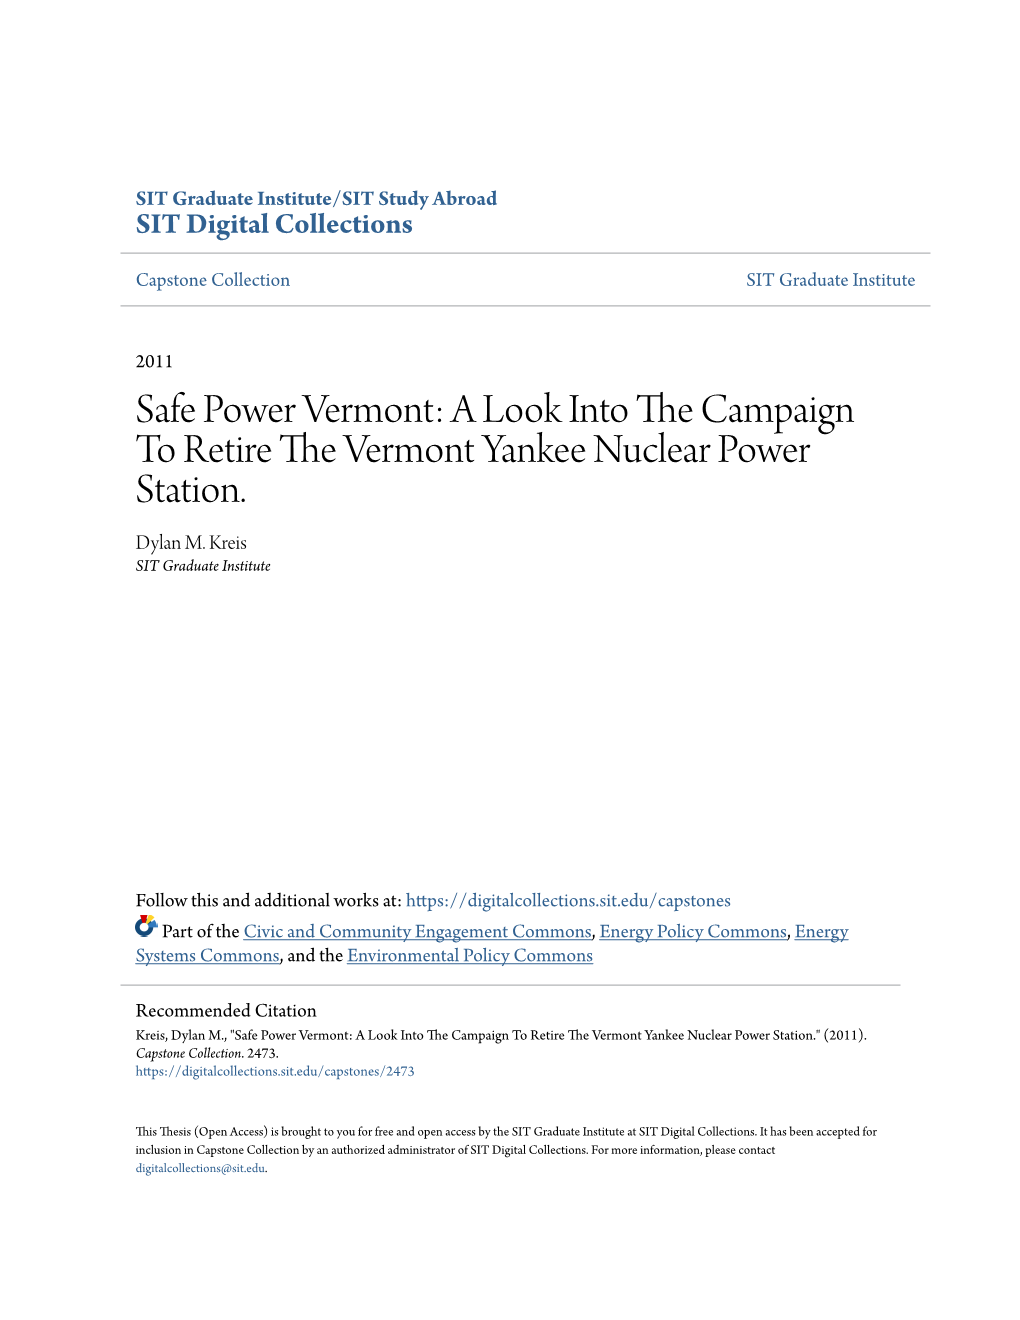 A Look Into the Campaign to Retire the Vermont Yankee Nuclear Power Station